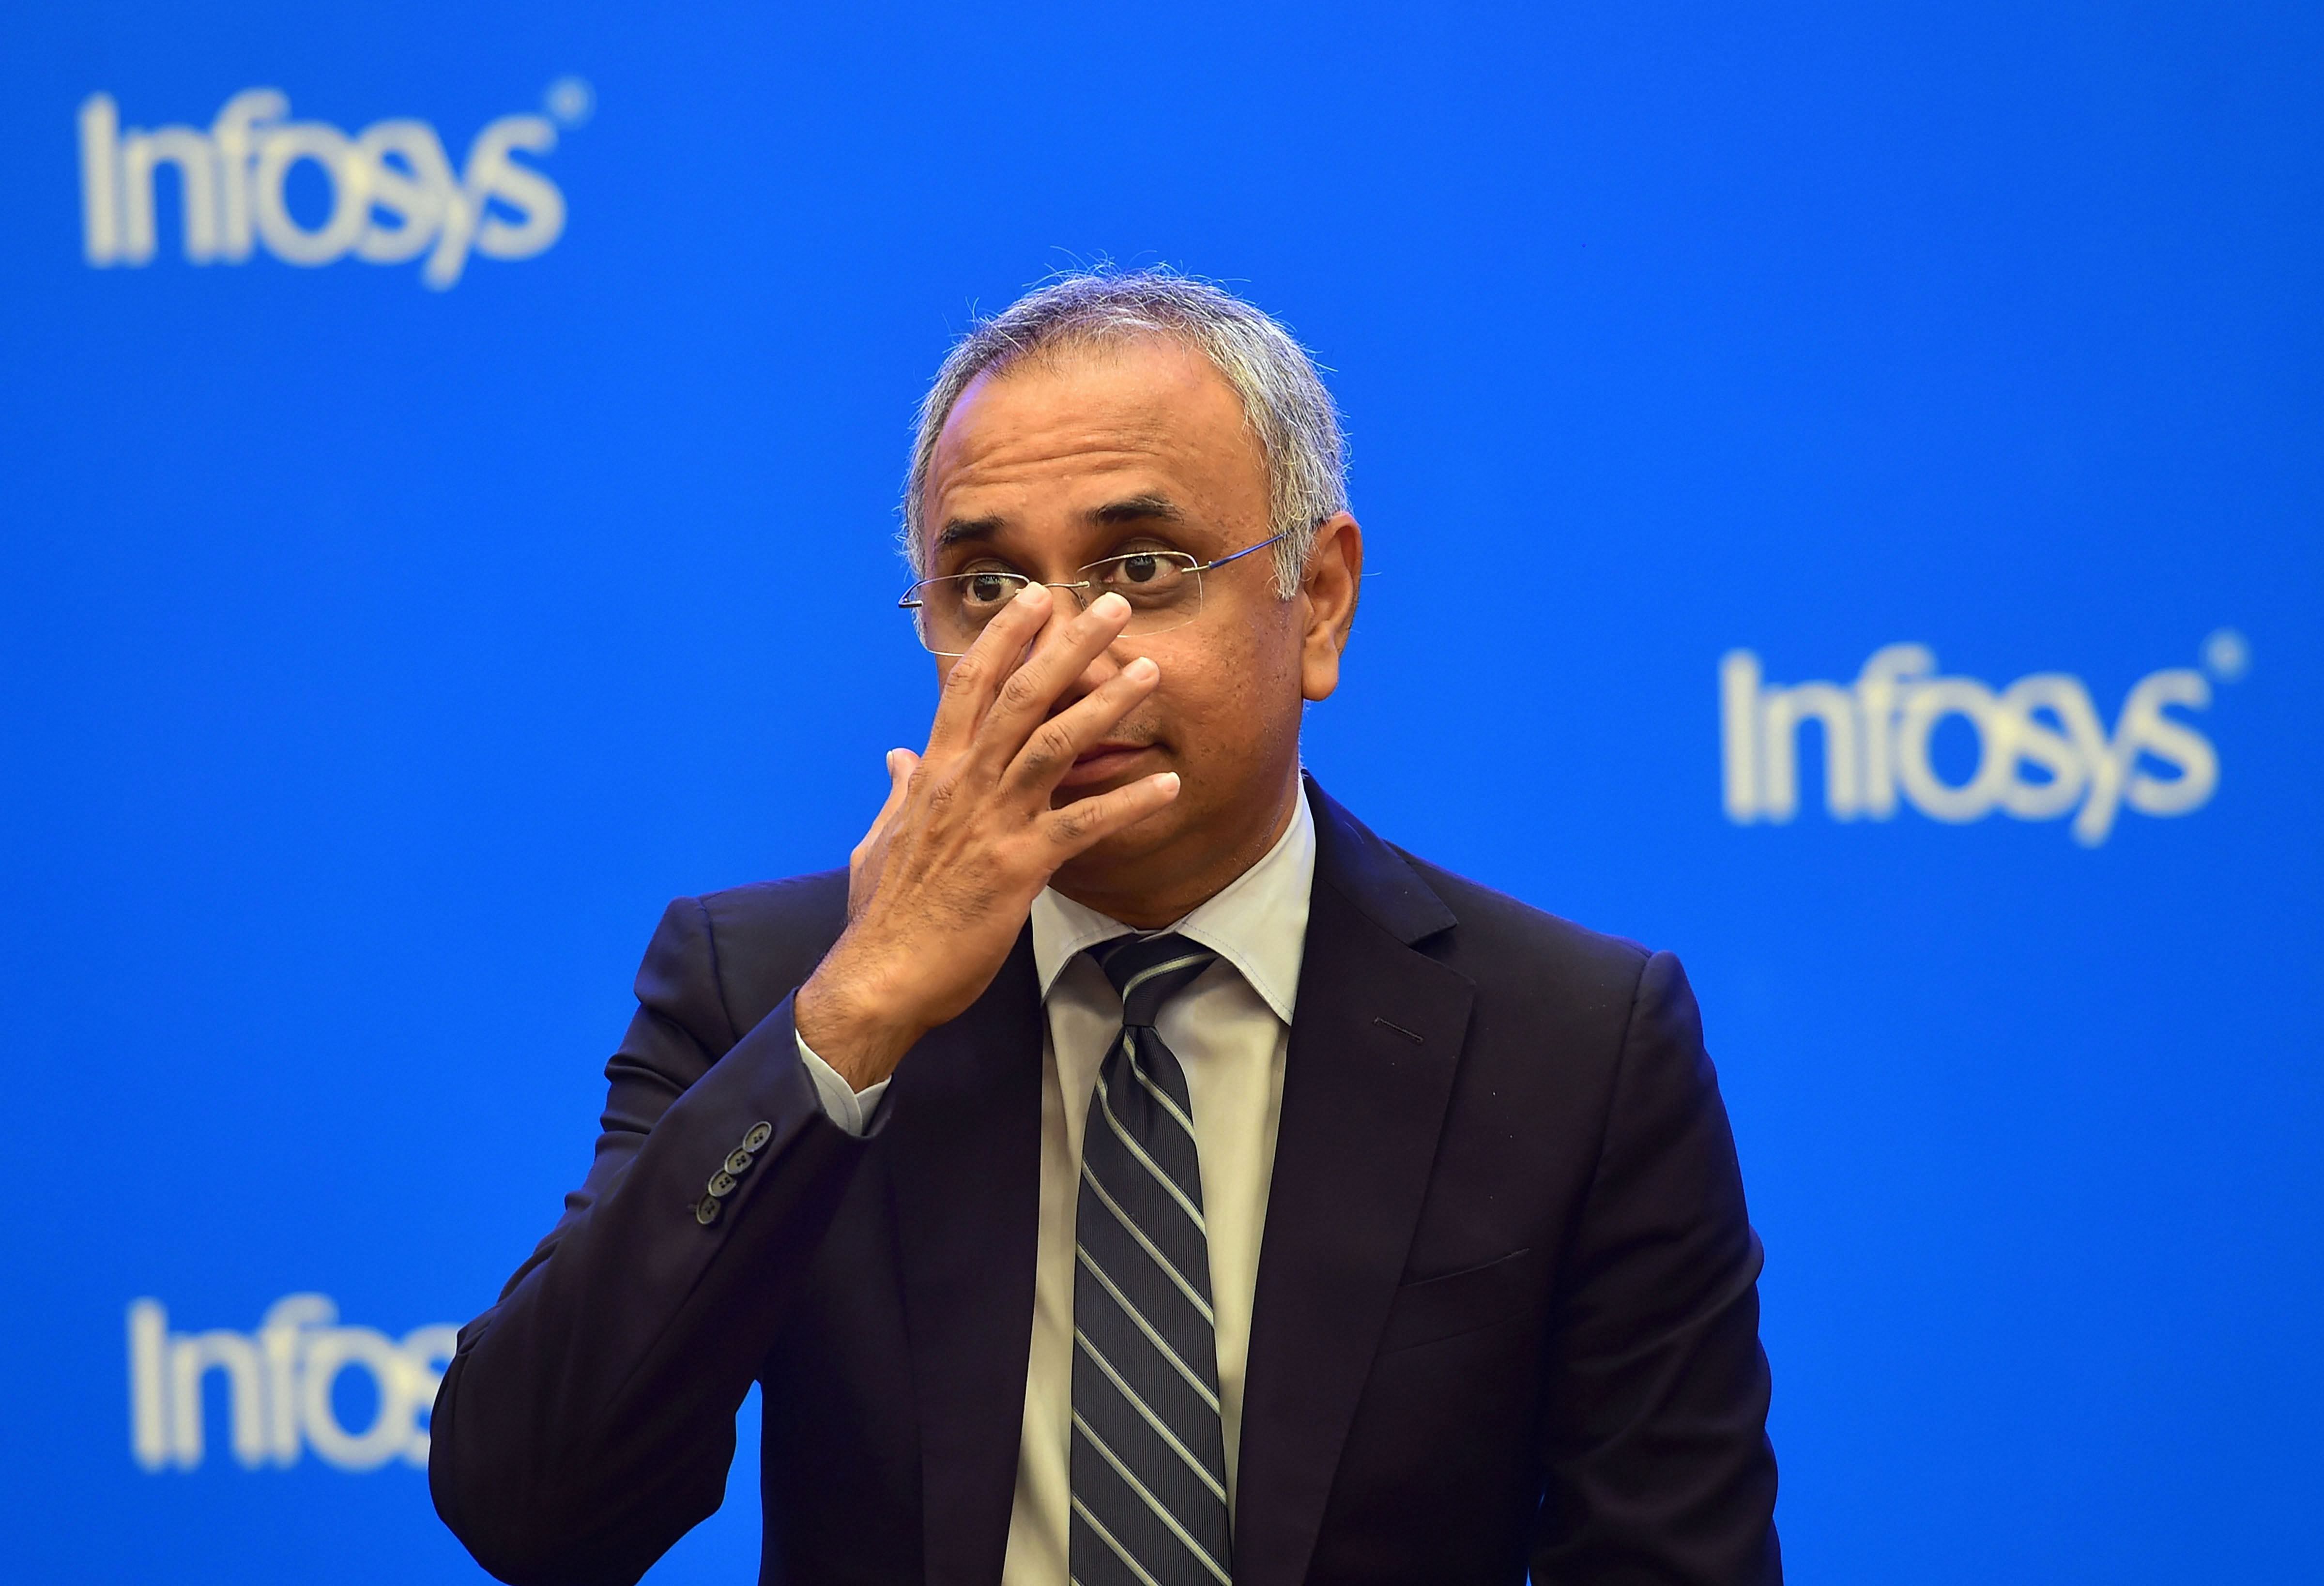  Infosys CEO Salil Parekh gestures during a press conference to announce the company's third quarter results in Bengaluru. (PTI Photo)